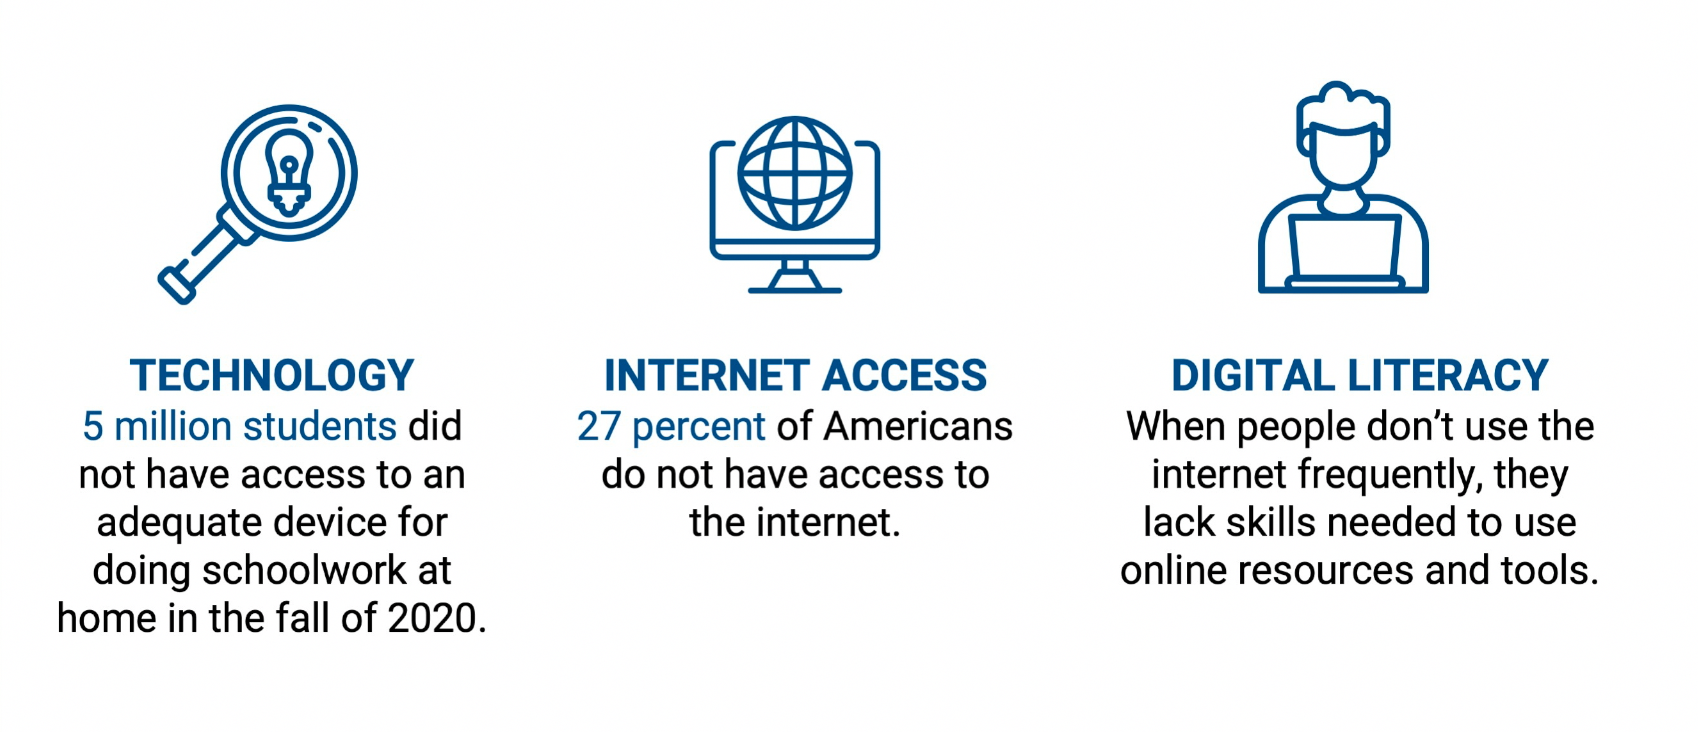 The three legs of the digital divide: Technology, Internet Access, and Digital Literacy 